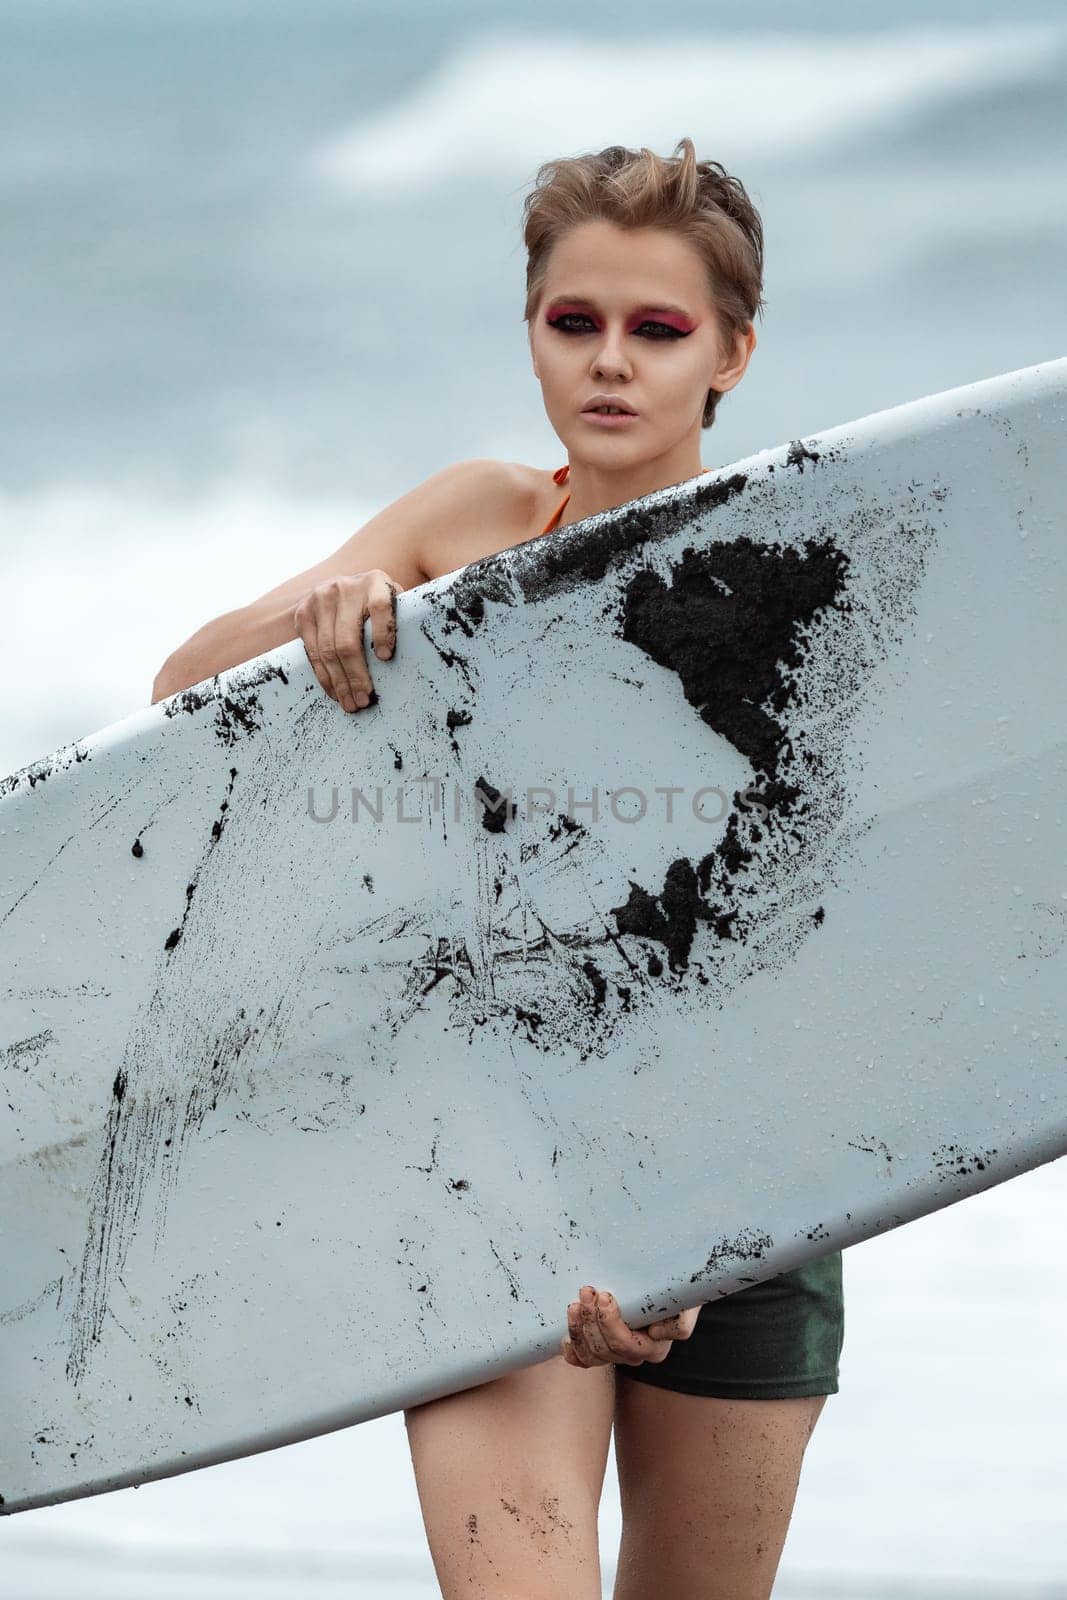 Female surfer carrying white surfboard is walking on beach and looking at camera with sea waves in background. Beauty woman doing sports symbolizes concept of physical activity and healthy lifestyle